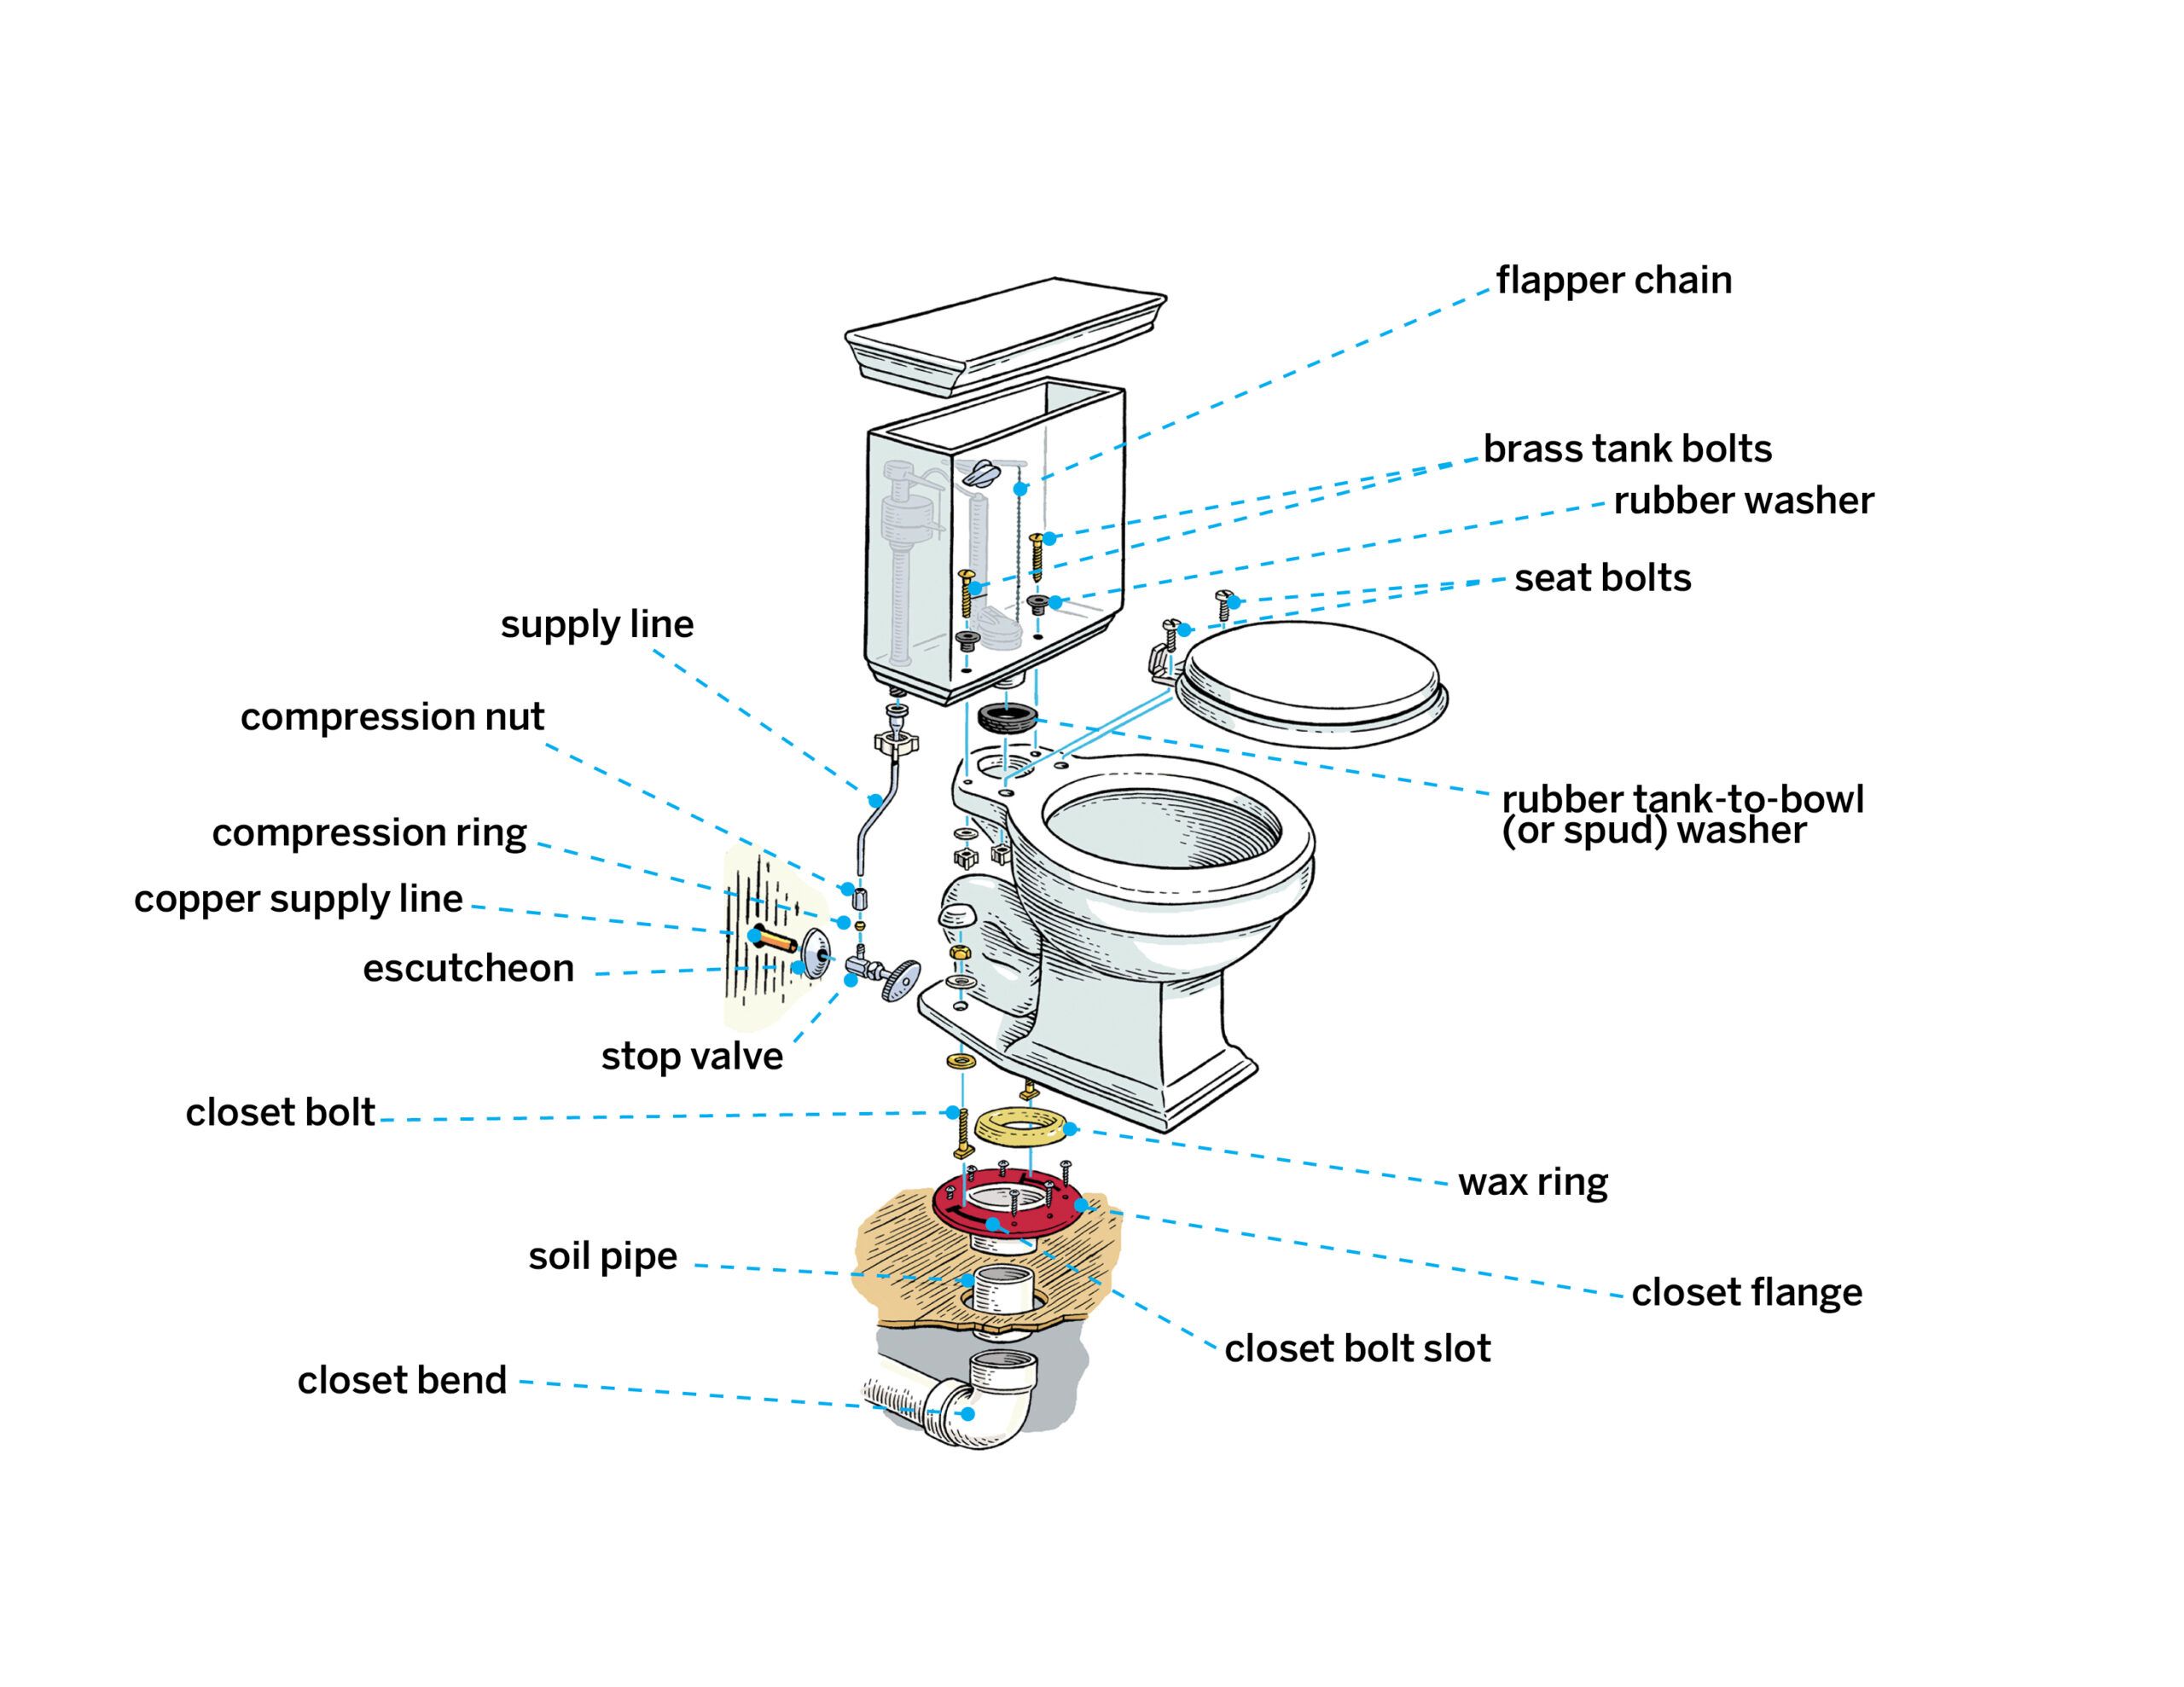 I. Introduction to Installing/Replacing a Toilet Tank